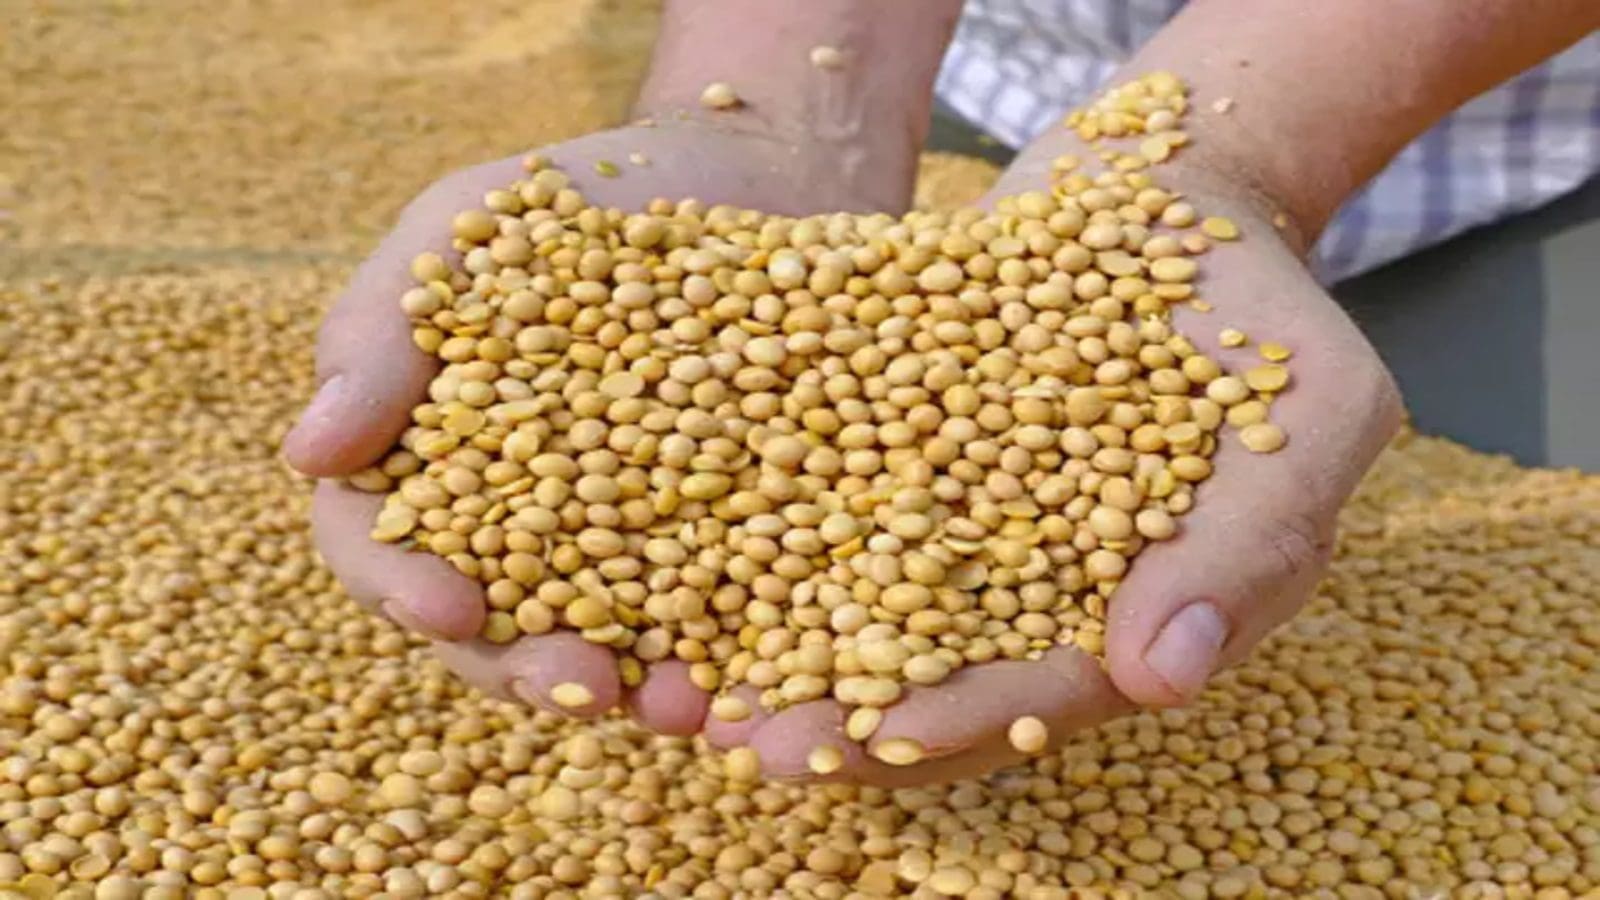 Soybeans emerge as a promising cash crop to bolster Ghana’s economic growth